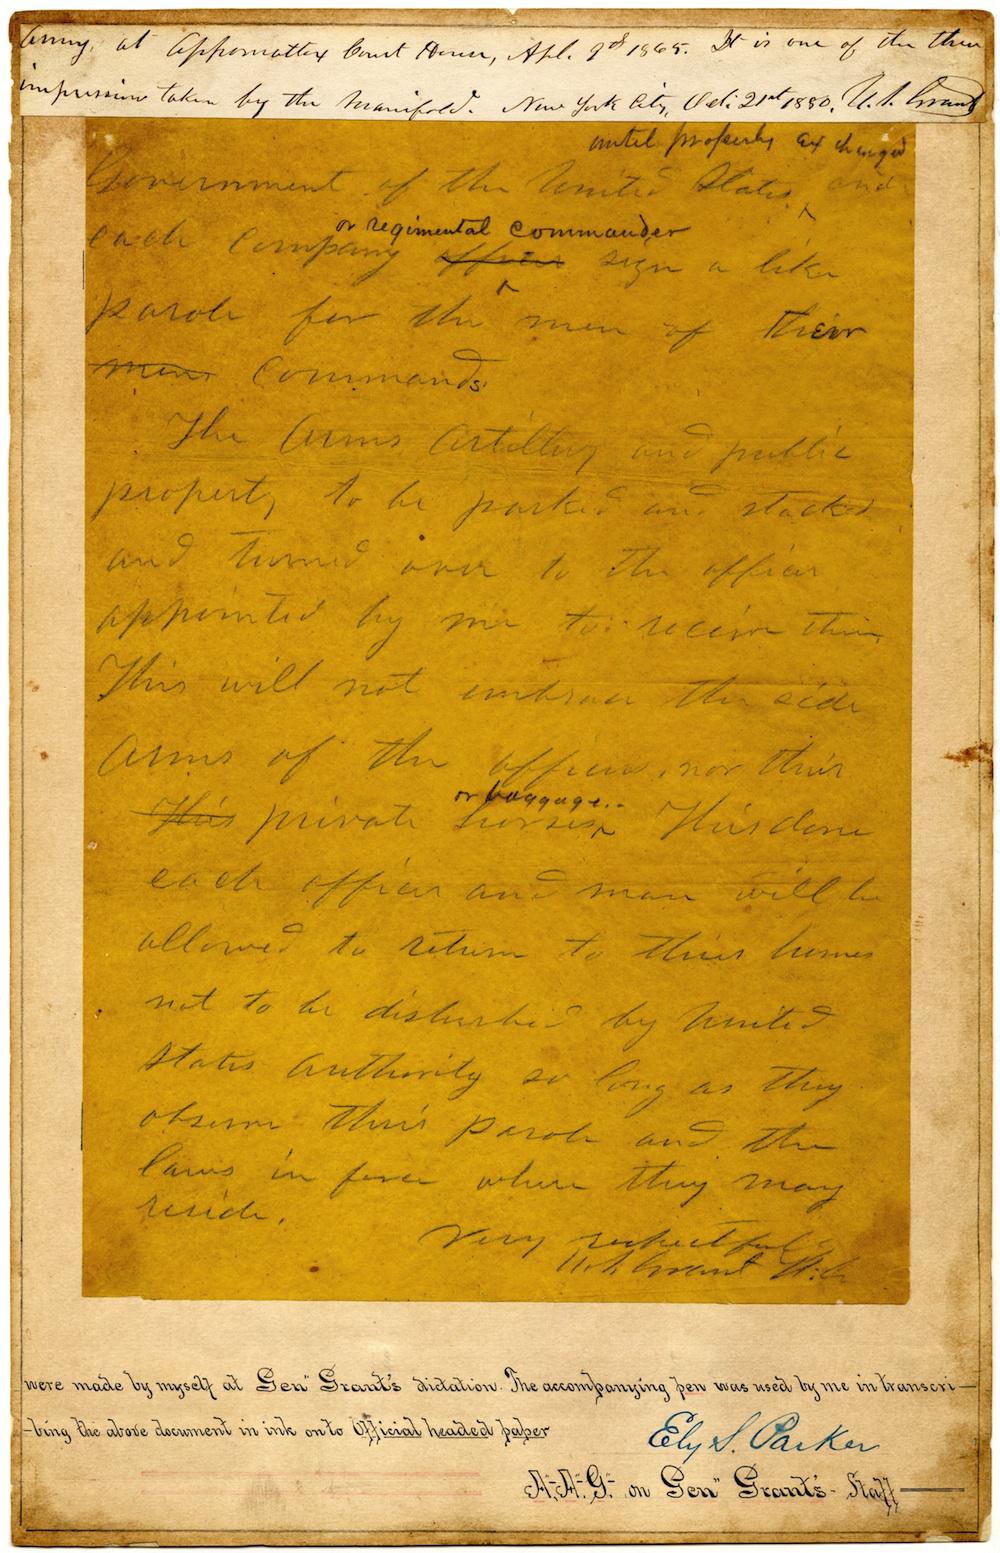 Surrender at Appomattox: Grant's surrender terms drafted by Ely Parker.